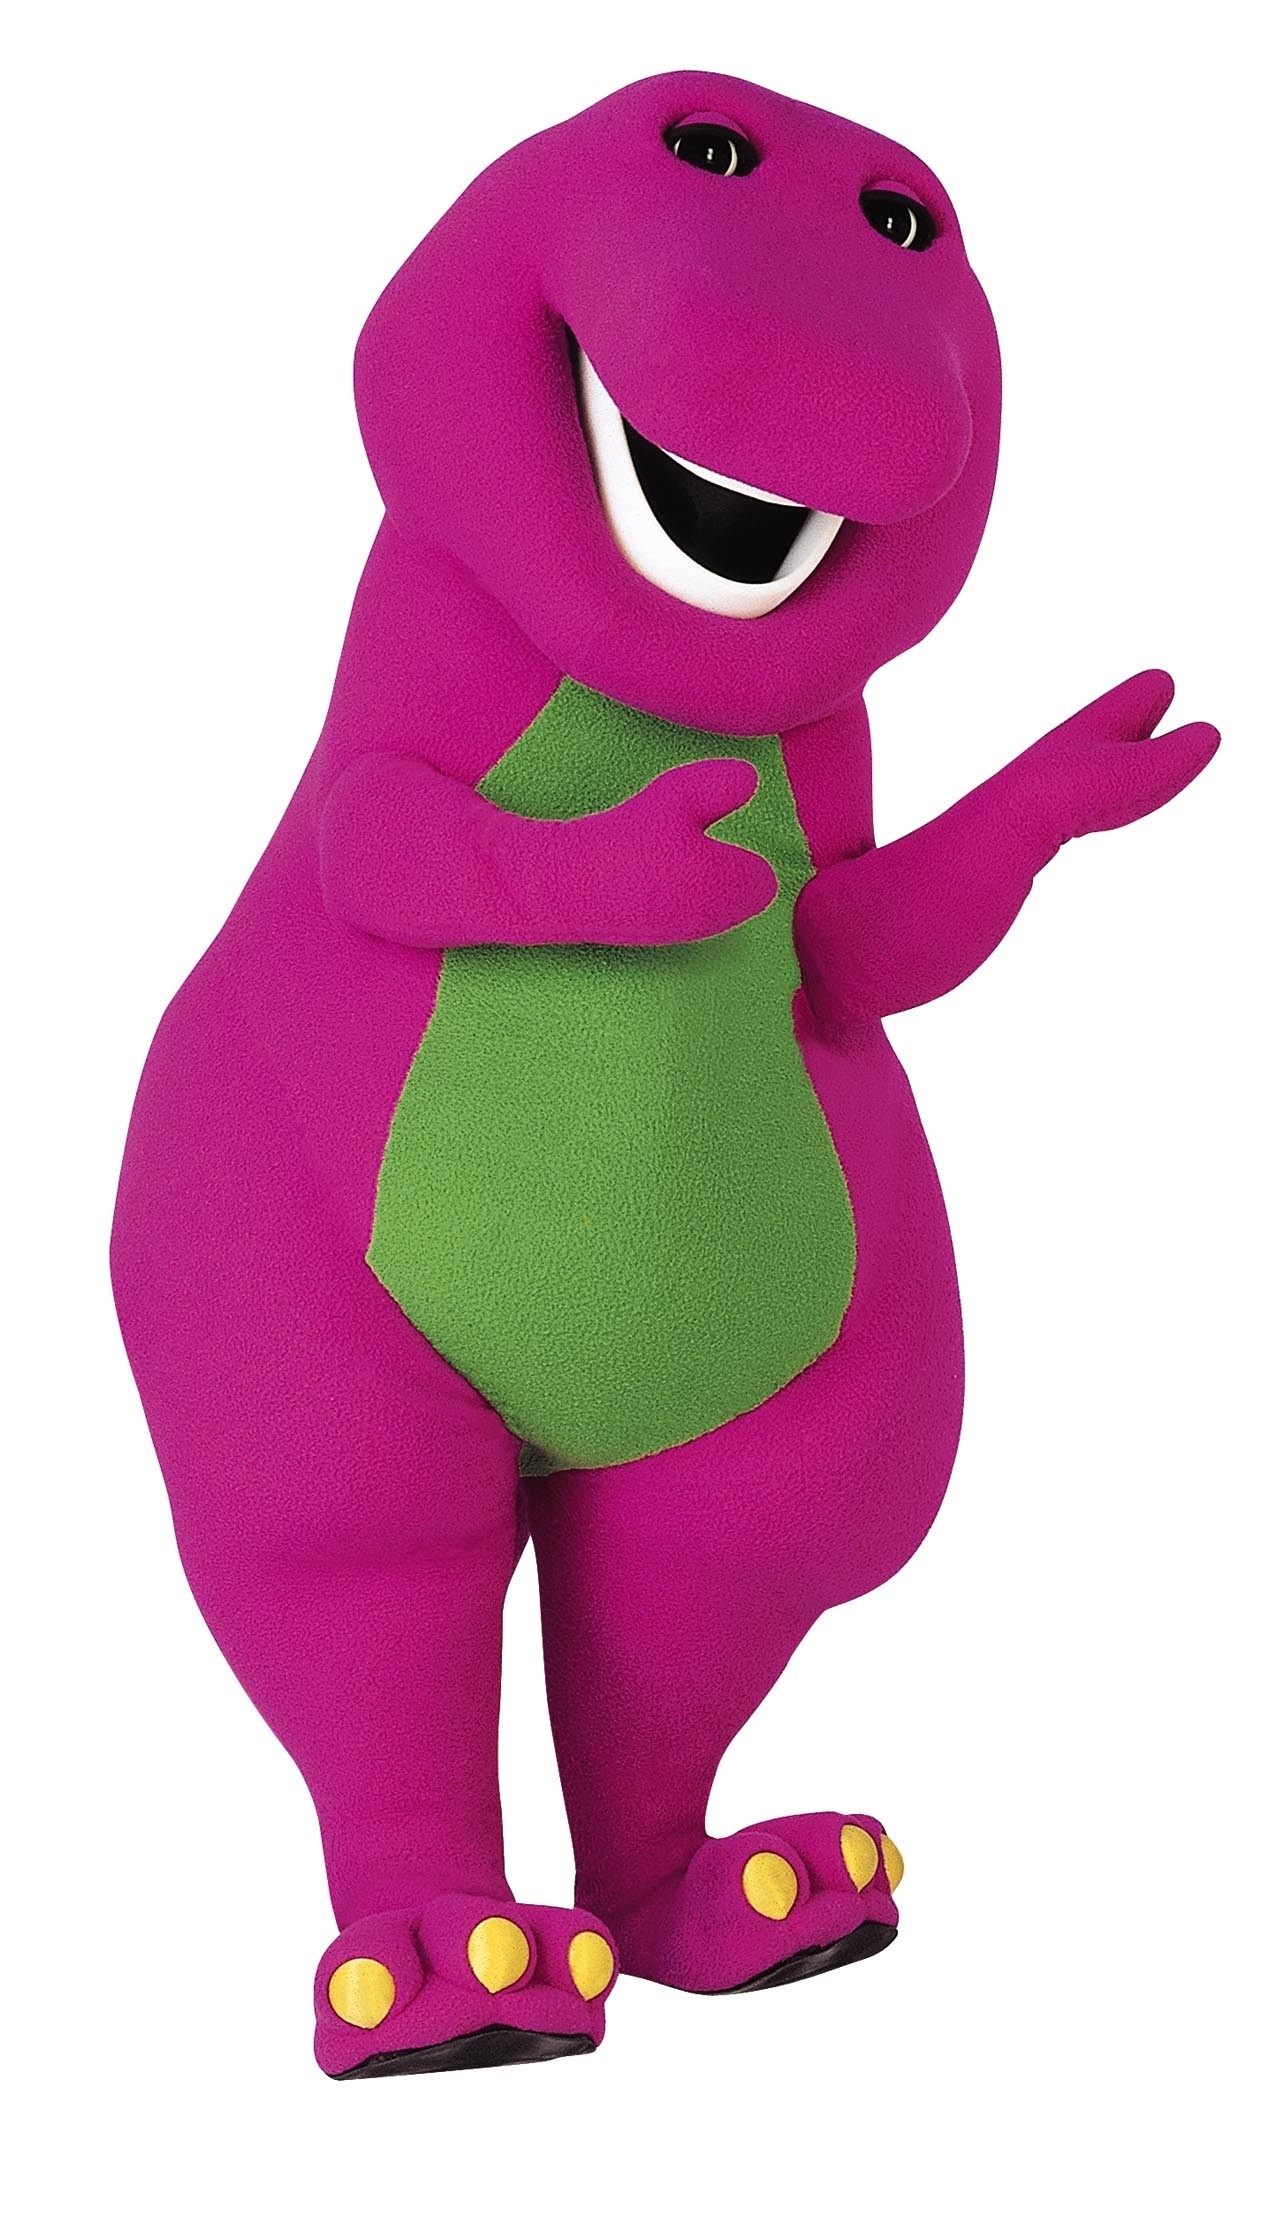 Barney And Friends Wallpaper.